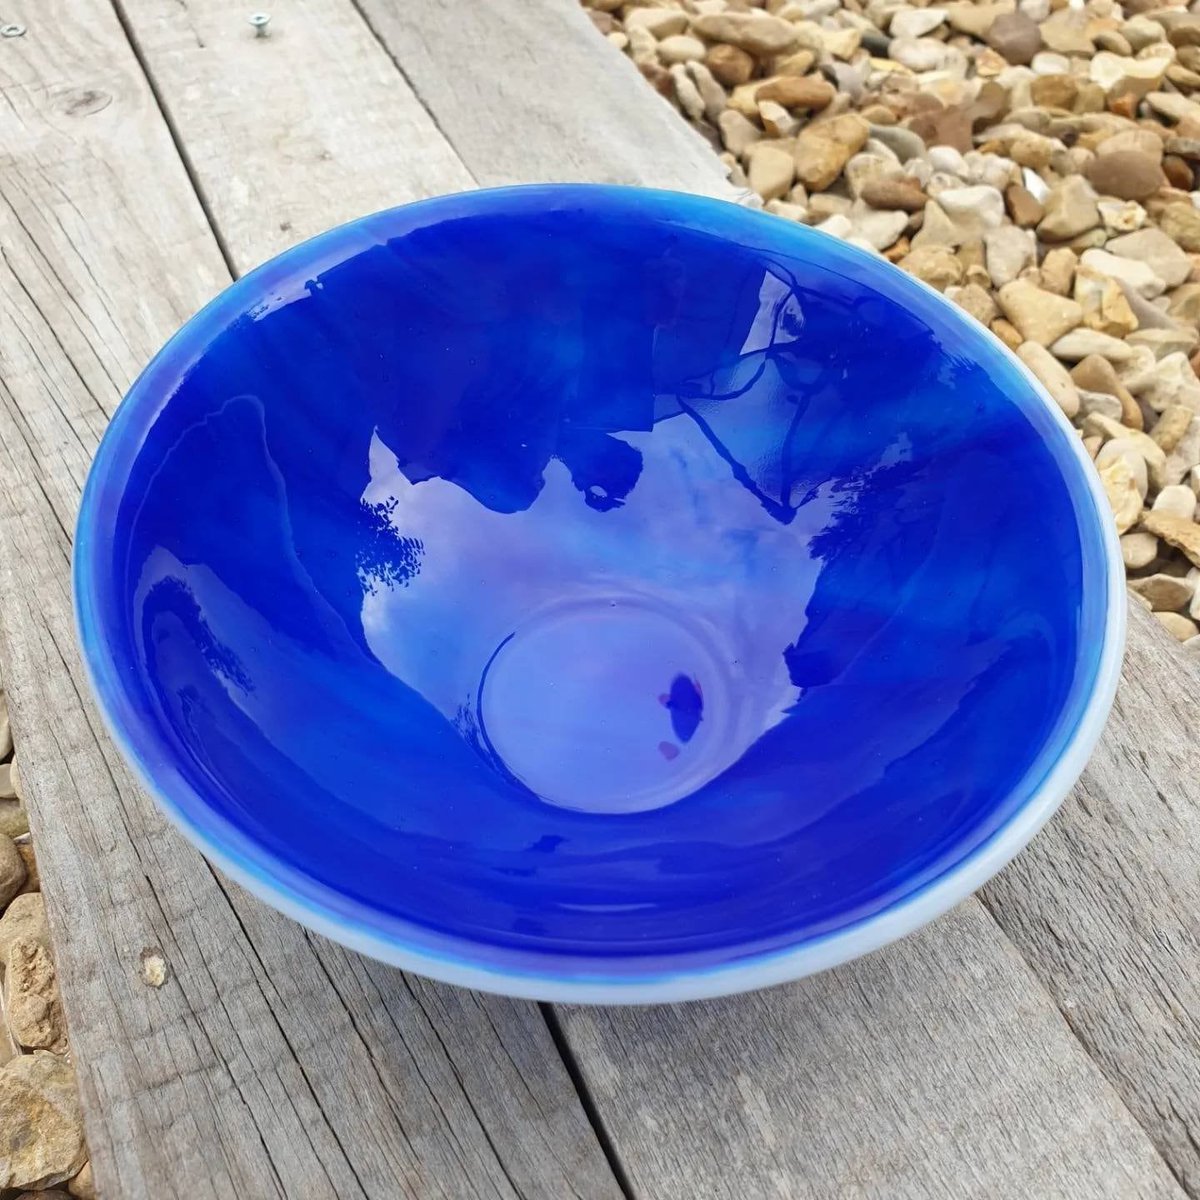 A beautiful circular deep blue fused glass bowl. Lovely handcrafted dish. Now been reduced in price. Love the colour of this blue and white dish #earlybiz #giftideas #handmade #etsy #shopindie buff.ly/3JNtUUE